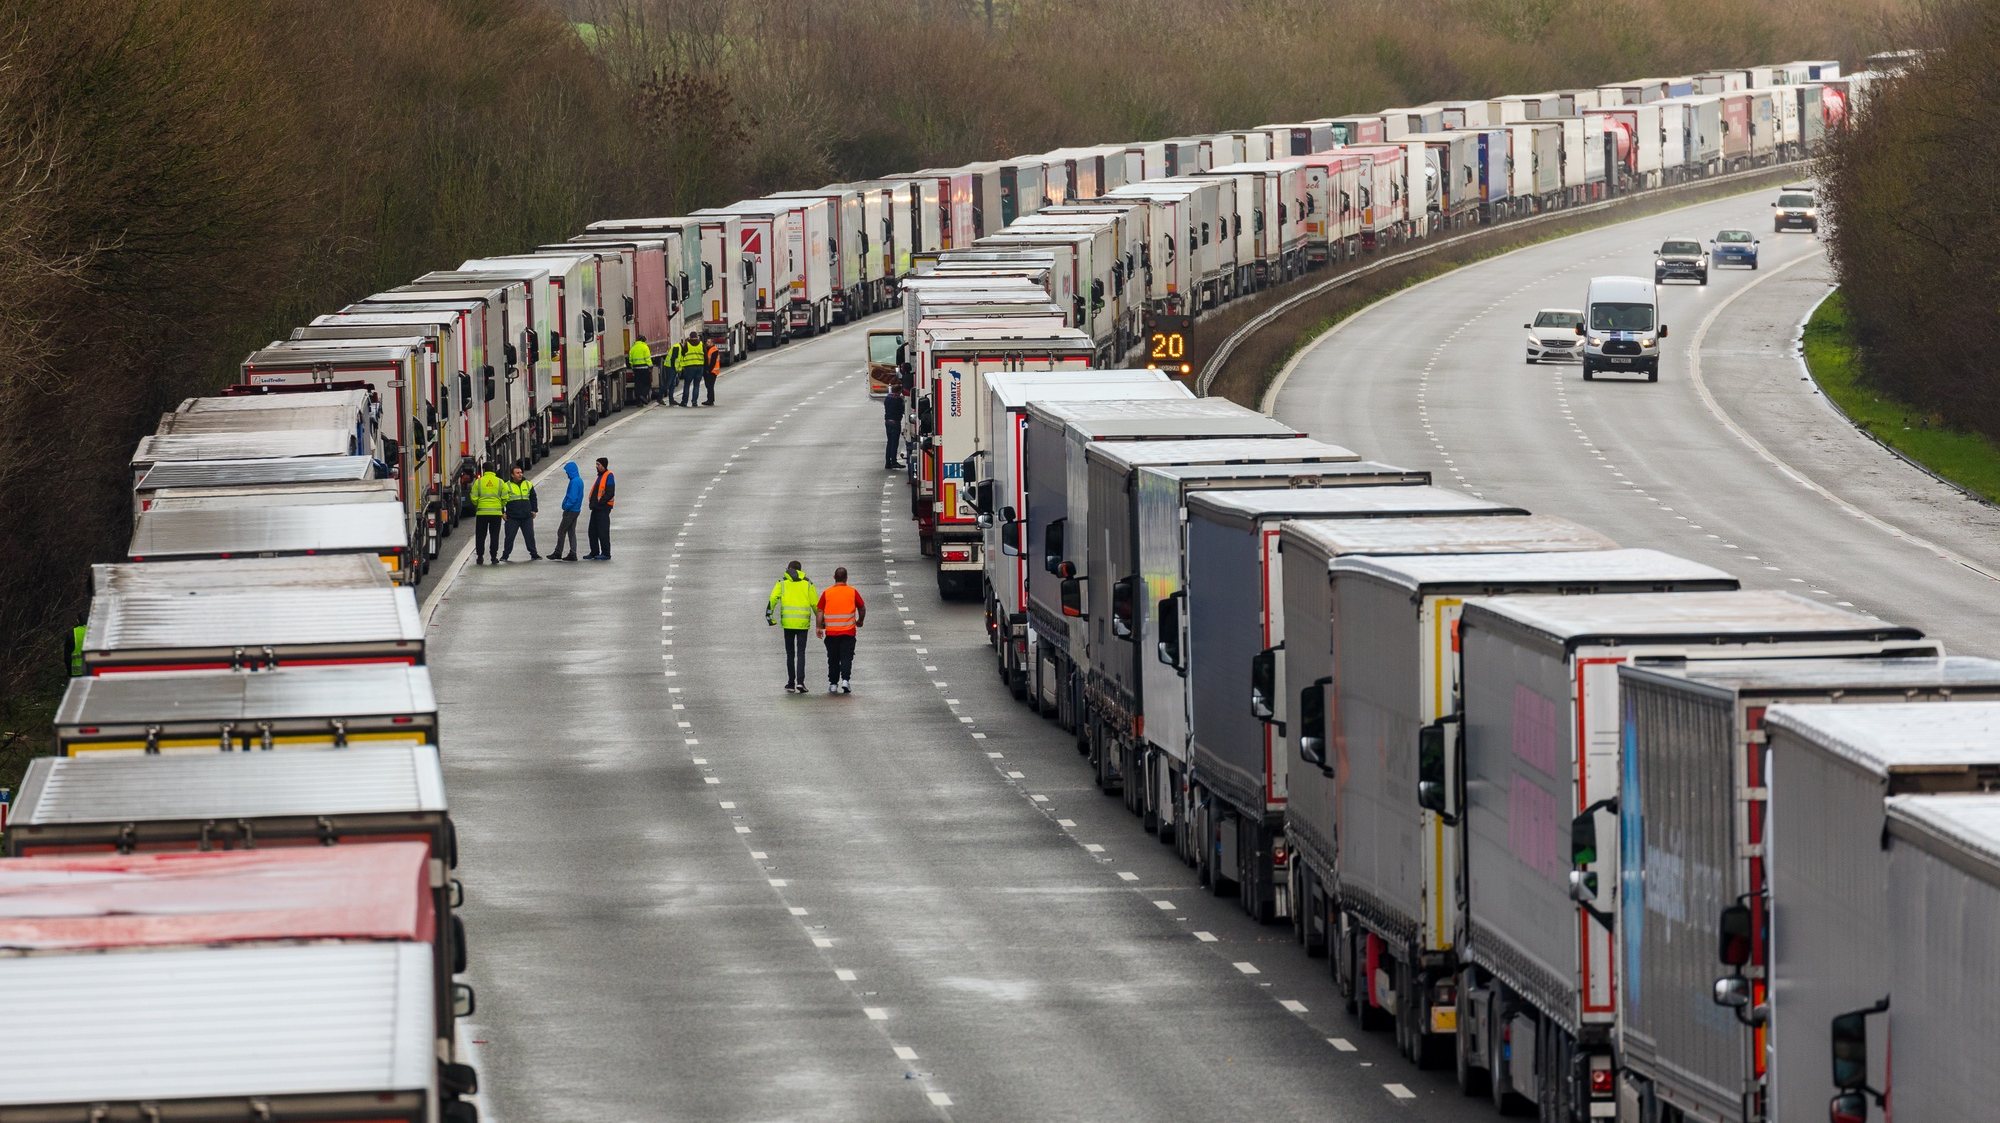 epa08901082 Queues of stationary lorries on the M20 motorway between Ashford and Folkestone in Kent, Britain, 23 December 2020. France closed its border with the UK for 48 hours over concerns about the new coronavirus variant. Lorry drivers must now obtain negative coronavirus tests before they will be allowed to cross by sea and the Port of Dover remains closed to outbound traffic on the morning of 23 December 2020.  EPA/VICKIE FLORES